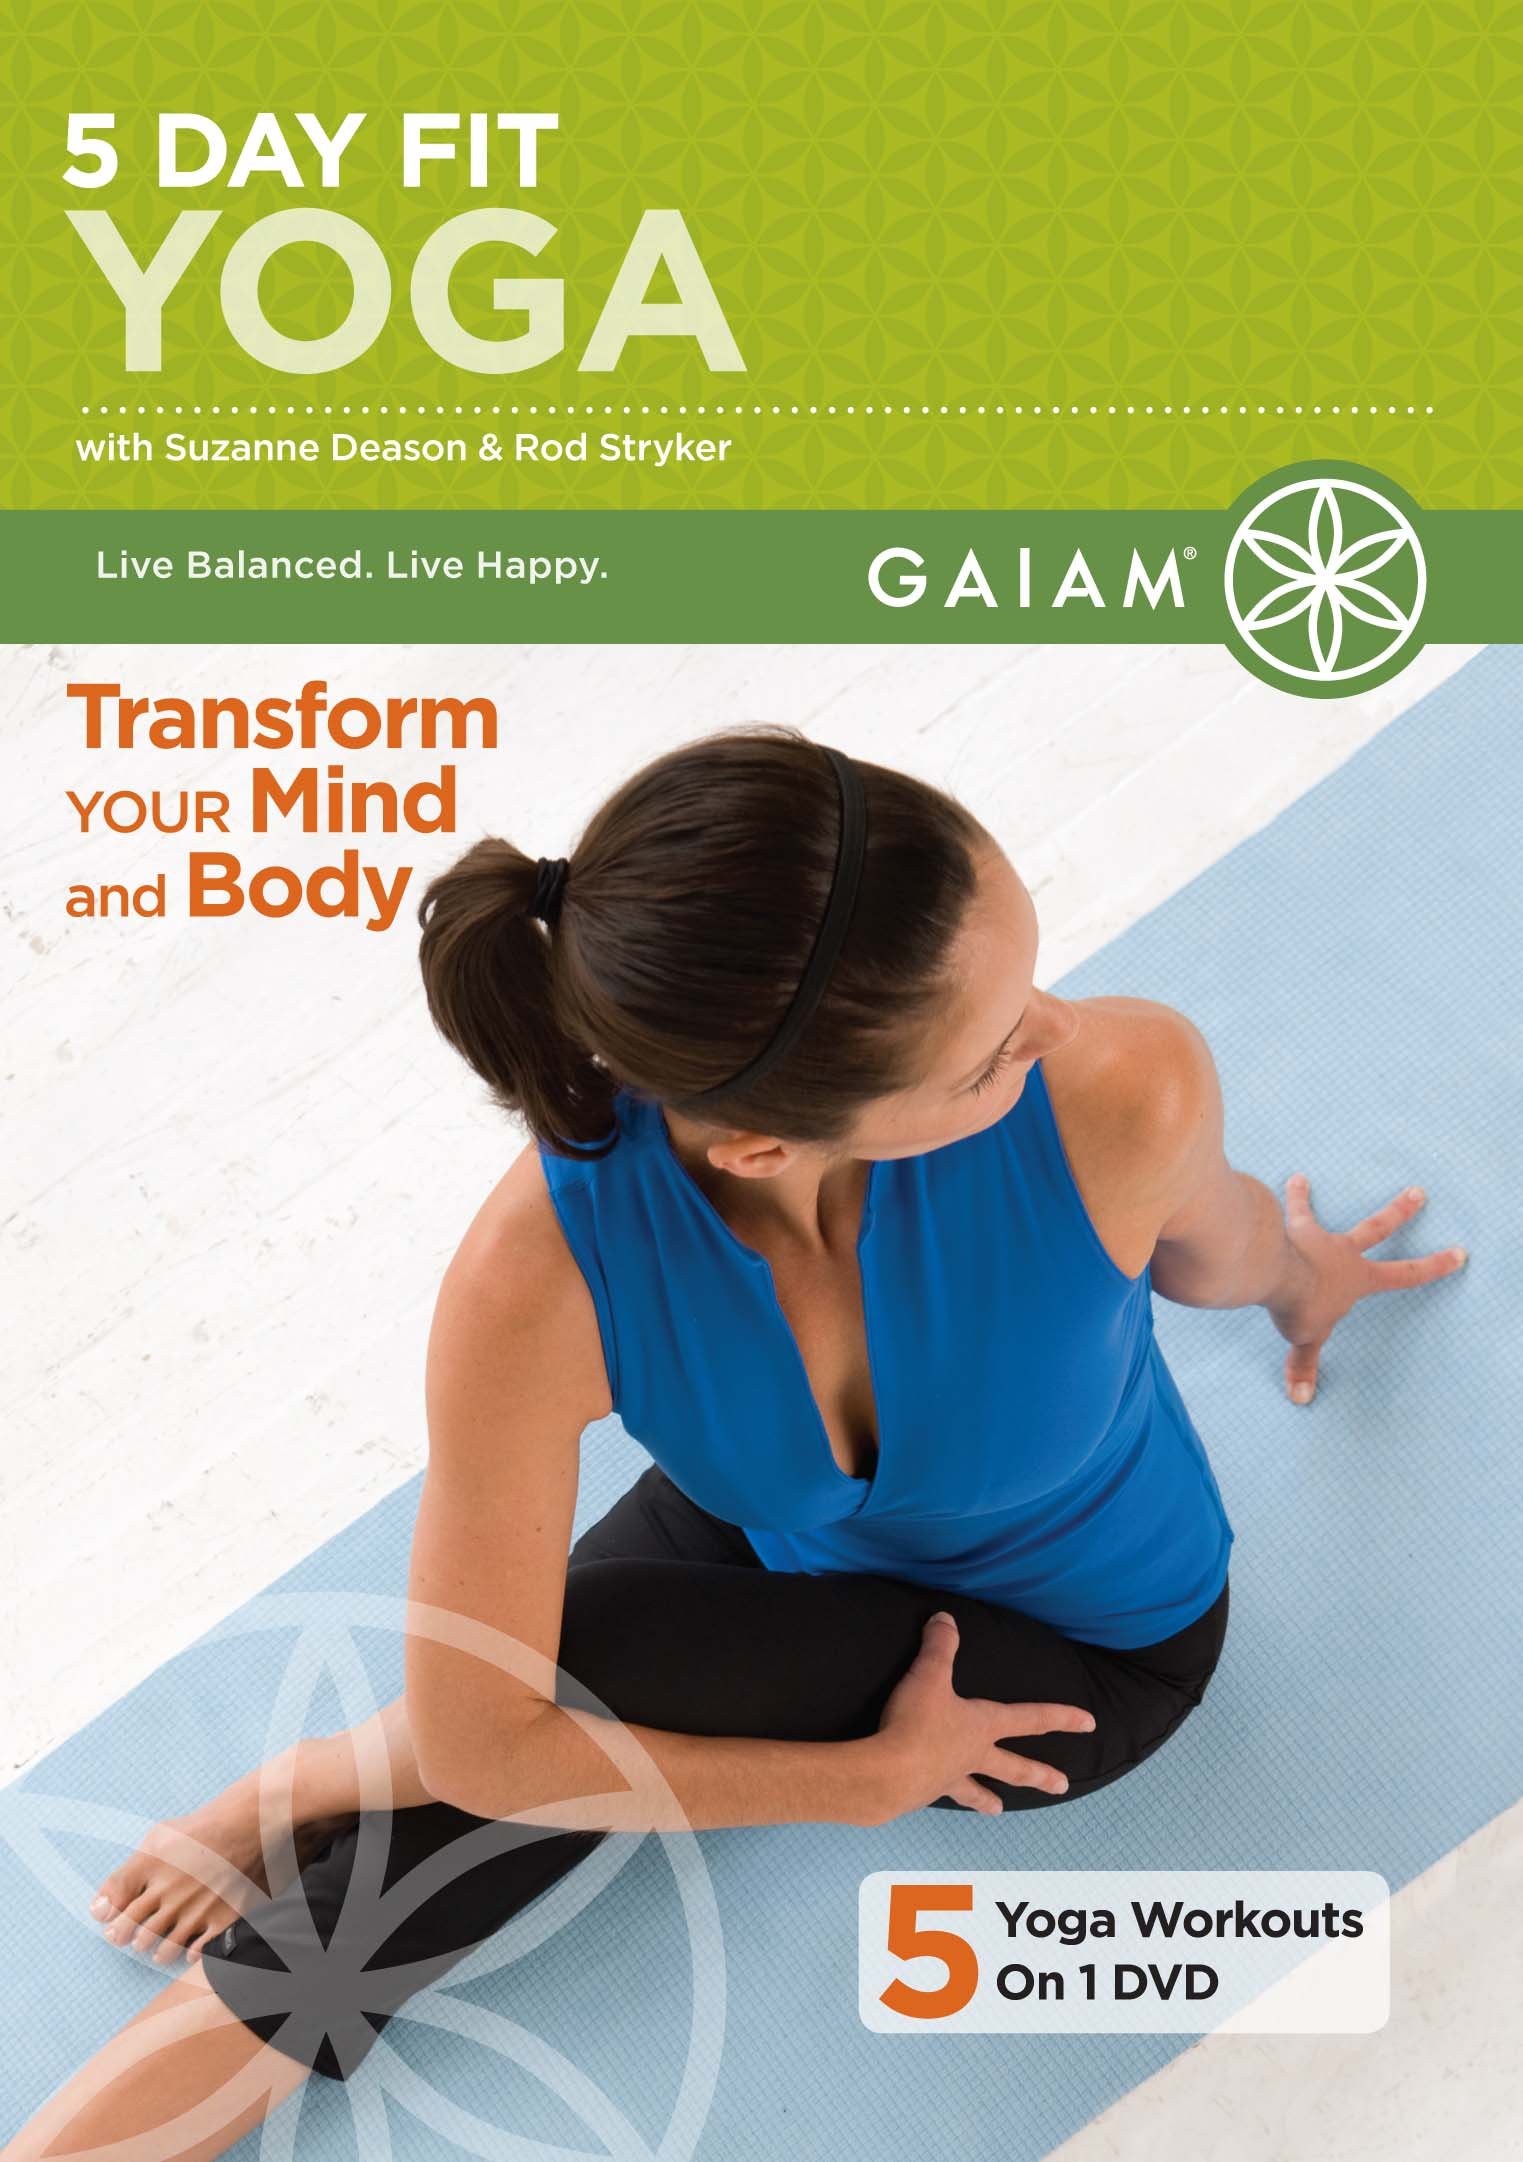 5 Day Fit Yoga (DVD), Gaiam Mod, Sports & Fitness - image 2 of 2